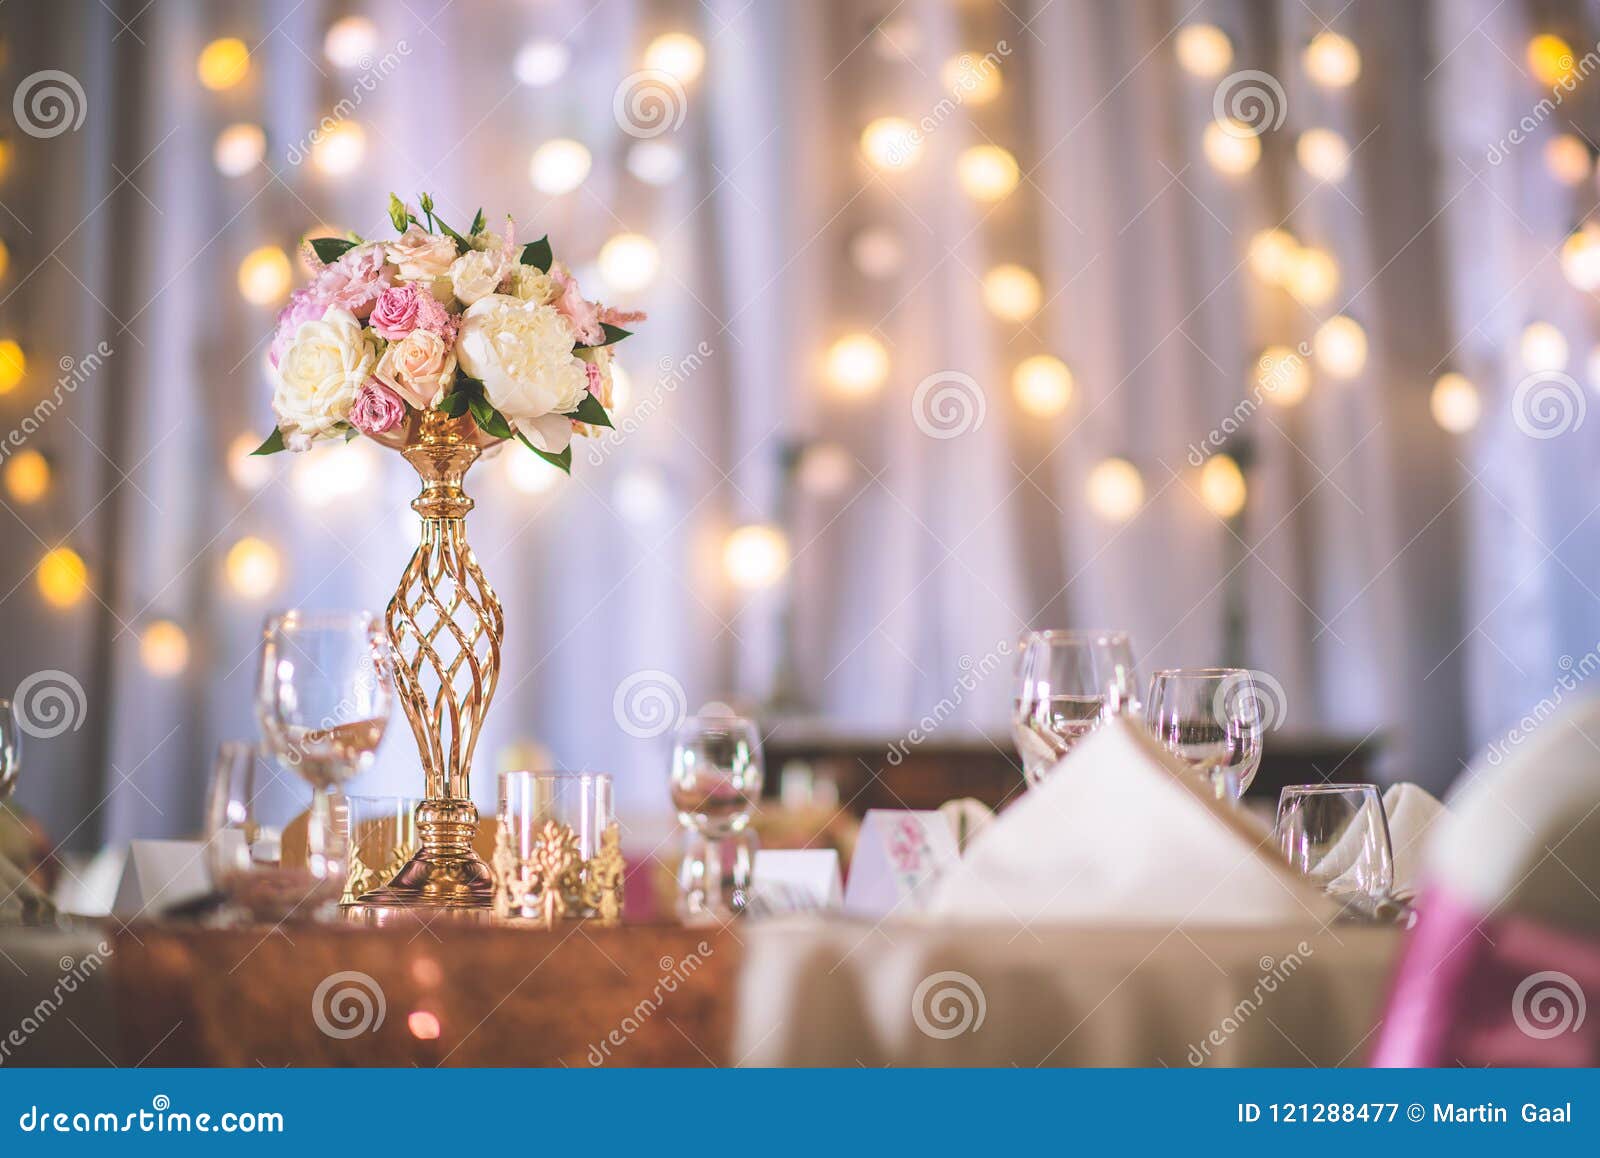 wedding table with exclusive floral arrangement prepared for reception, wedding or event centerpiece in rose gold color